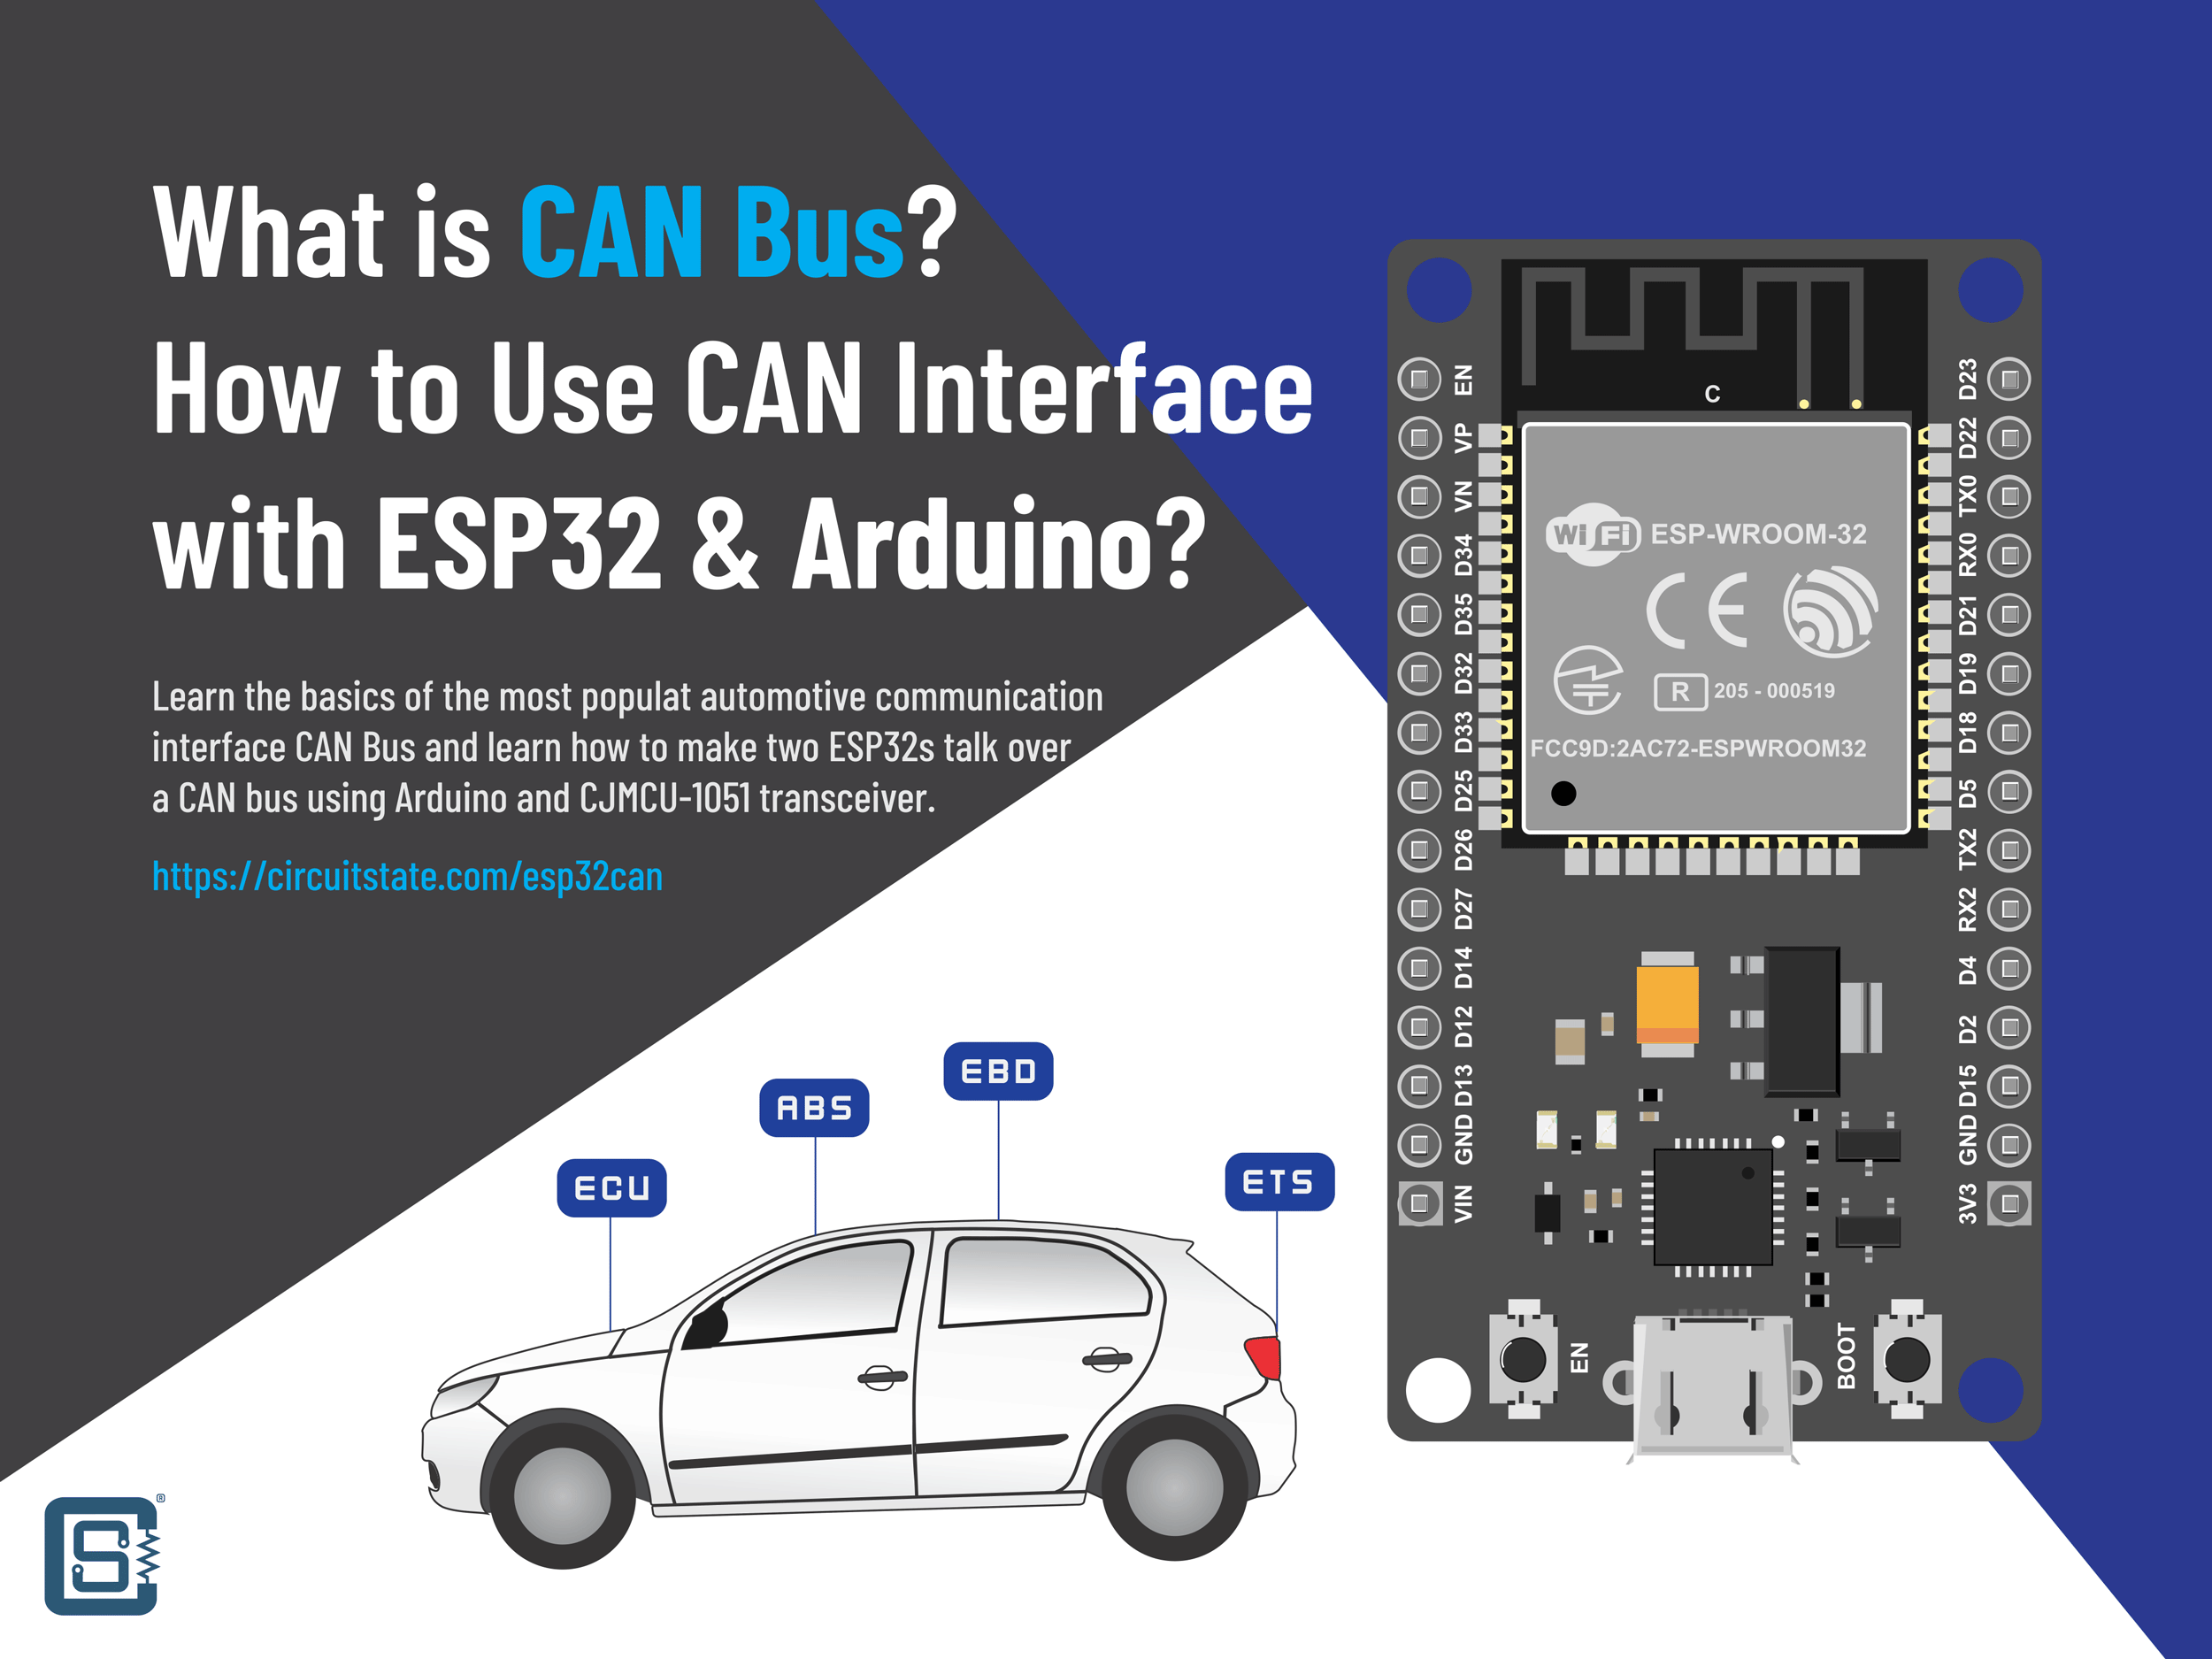 RejsaCAN = ESP32 + CAN bus by MagnusT